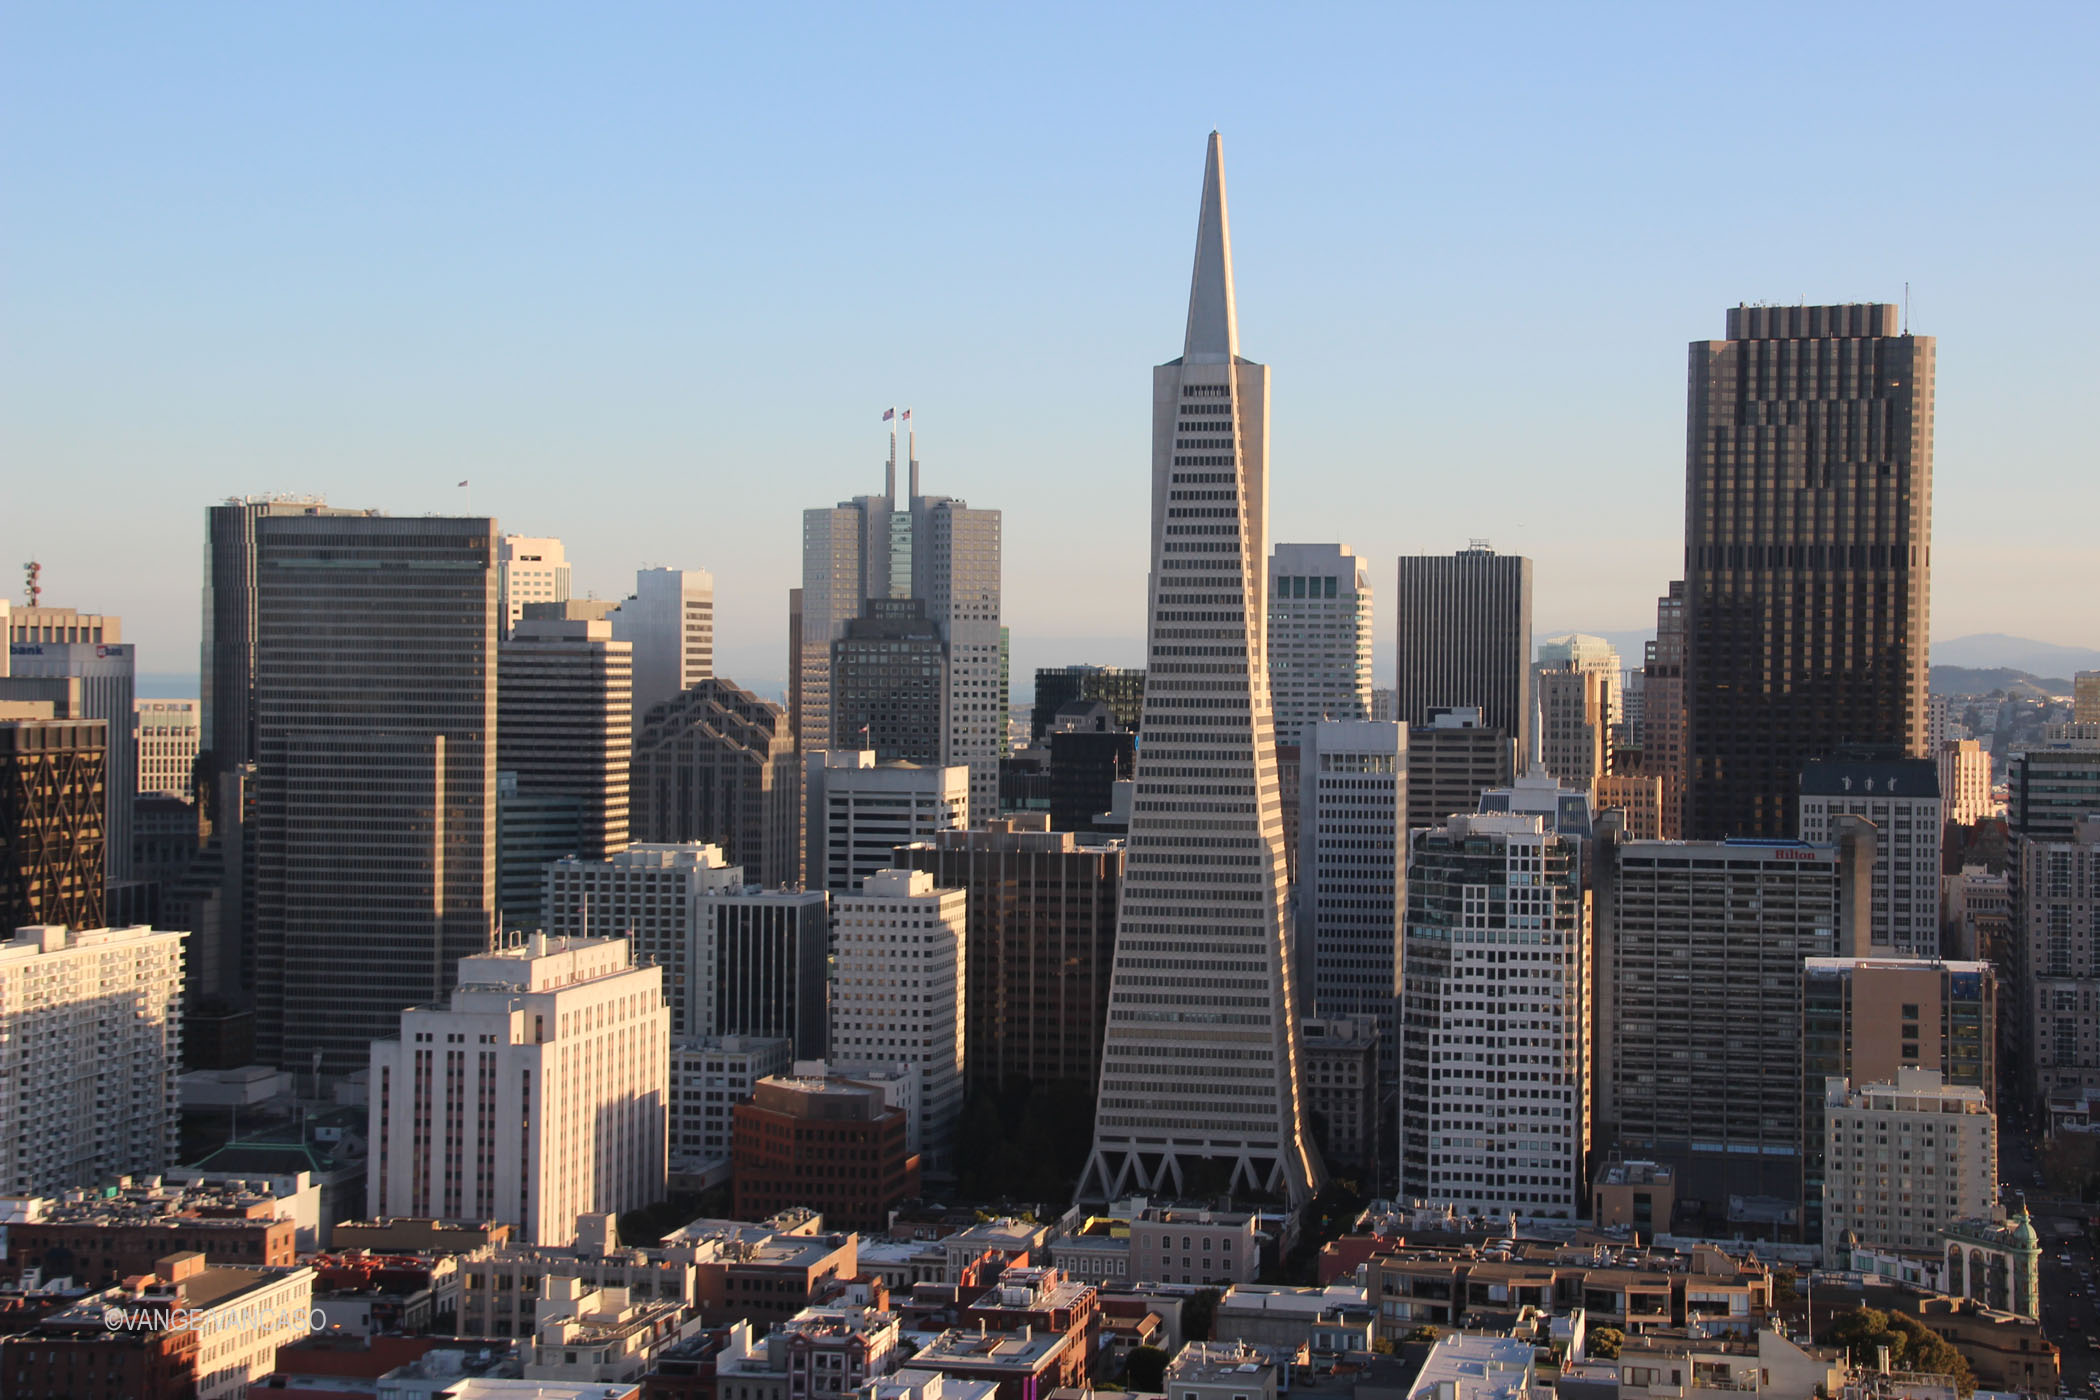 Downtown San Francisco from the Coit Tower